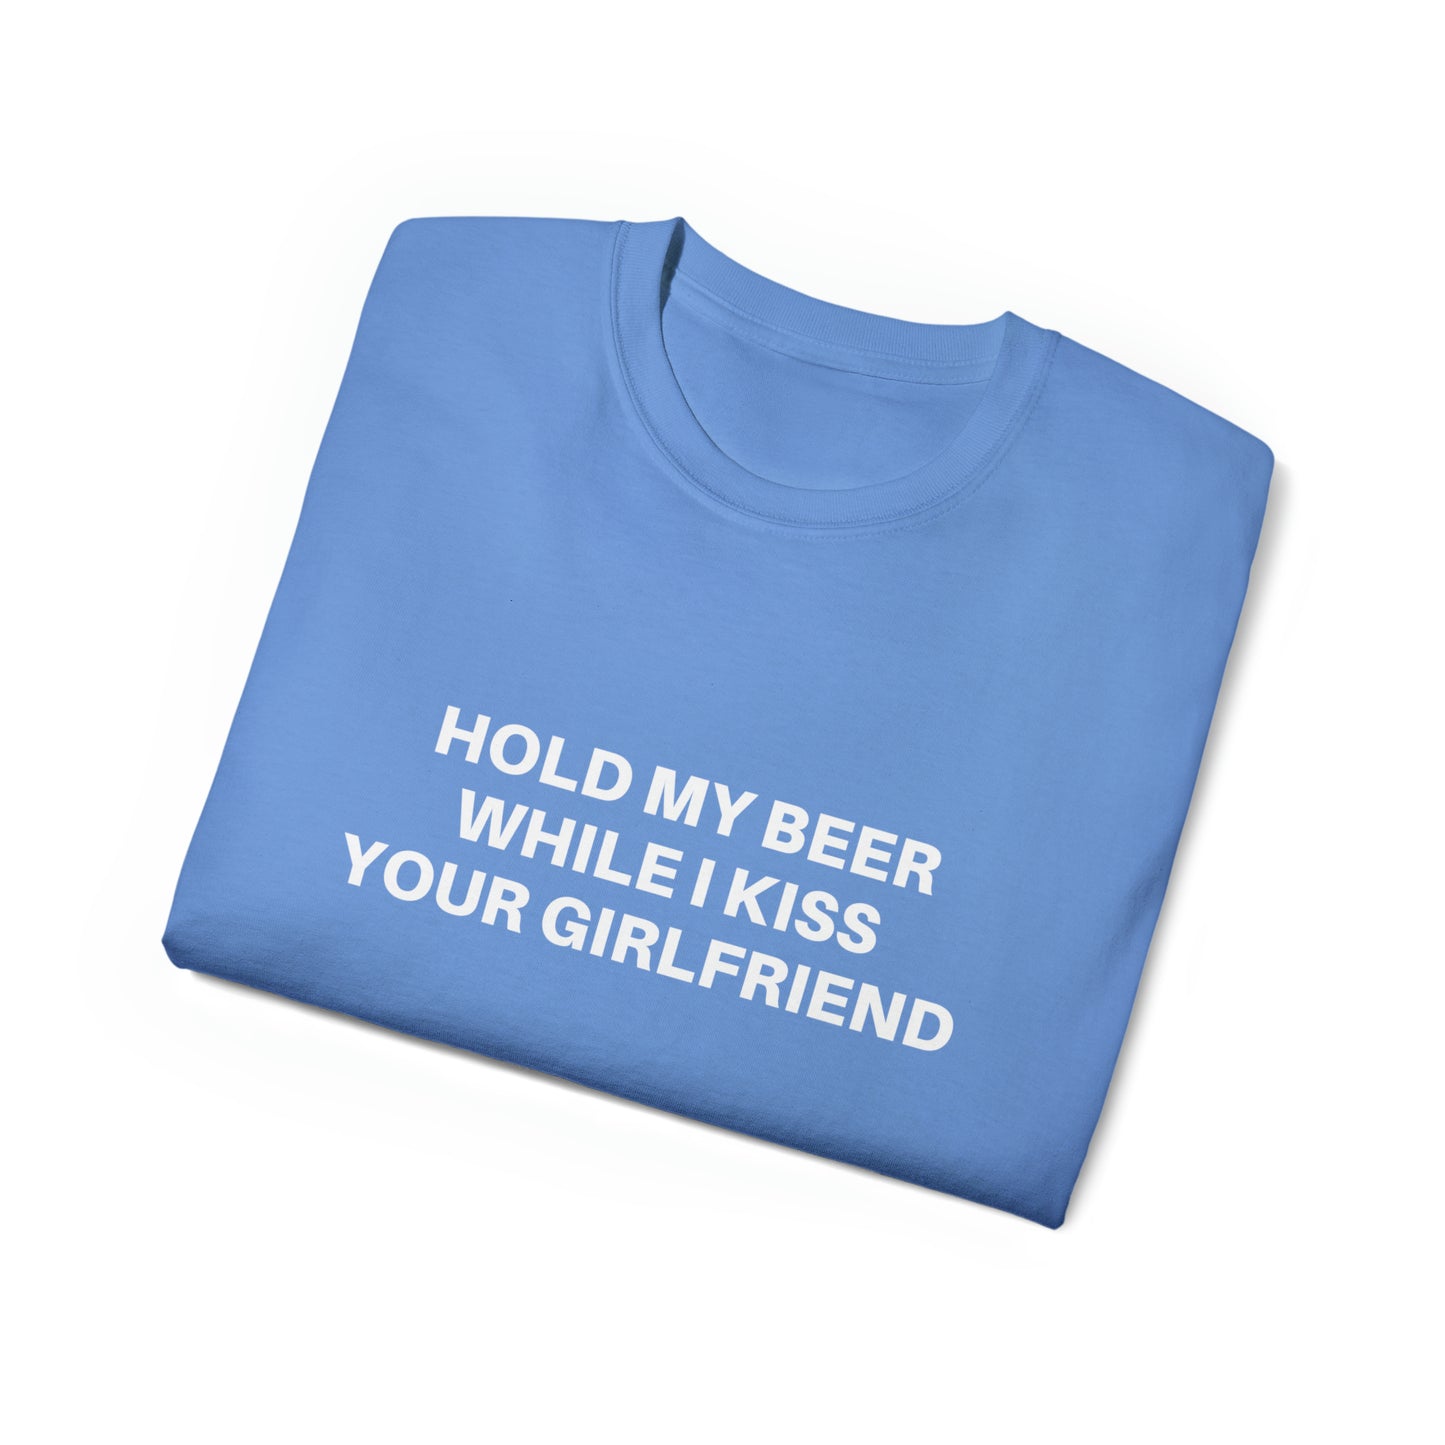 Hold my beer while I kiss your girlfriend | Tee